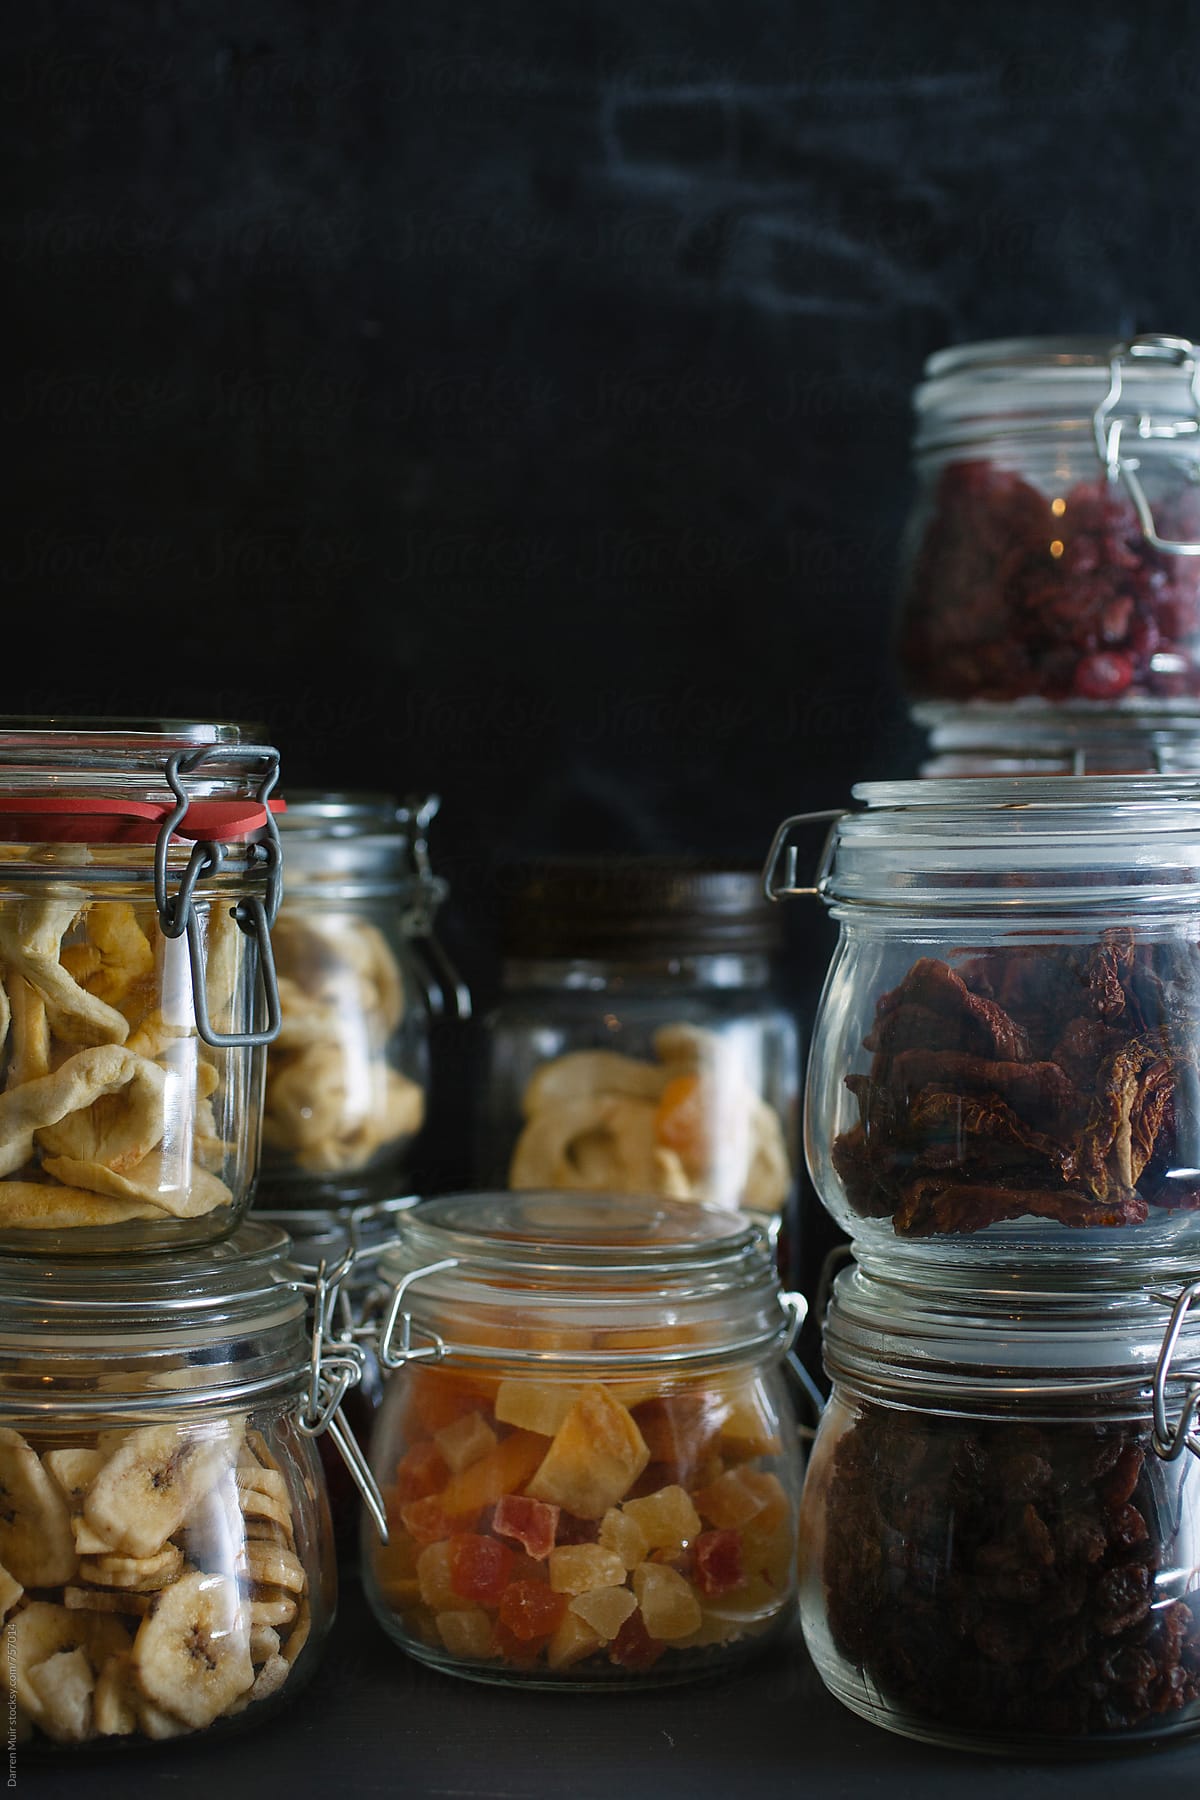 Dry fruit and vegetables: Jars of dehydrated fruit and vegetables in a larder.